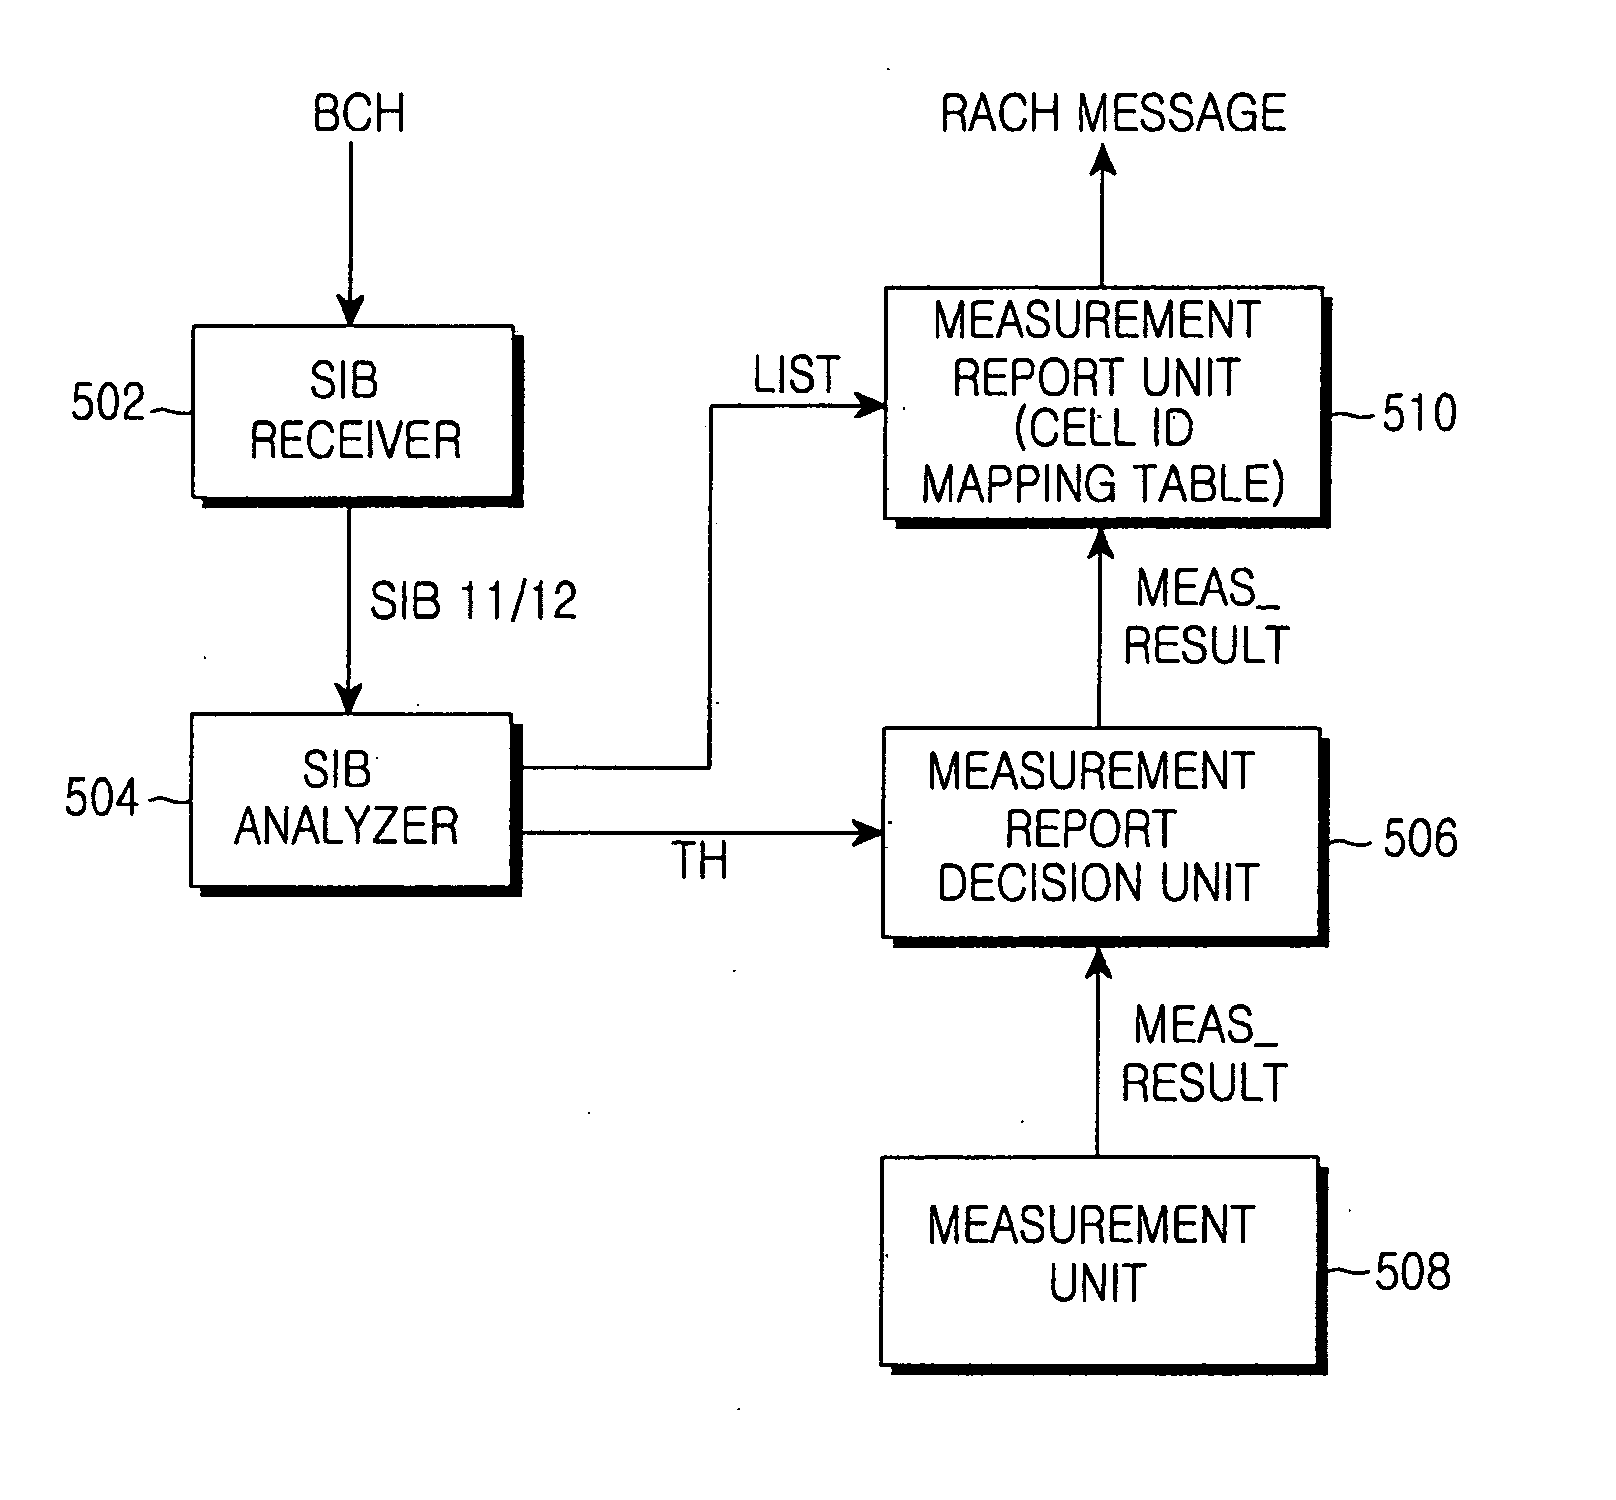 Method and apparatus for reporting inter-frequency measurement using RACH message in a mobile communication system